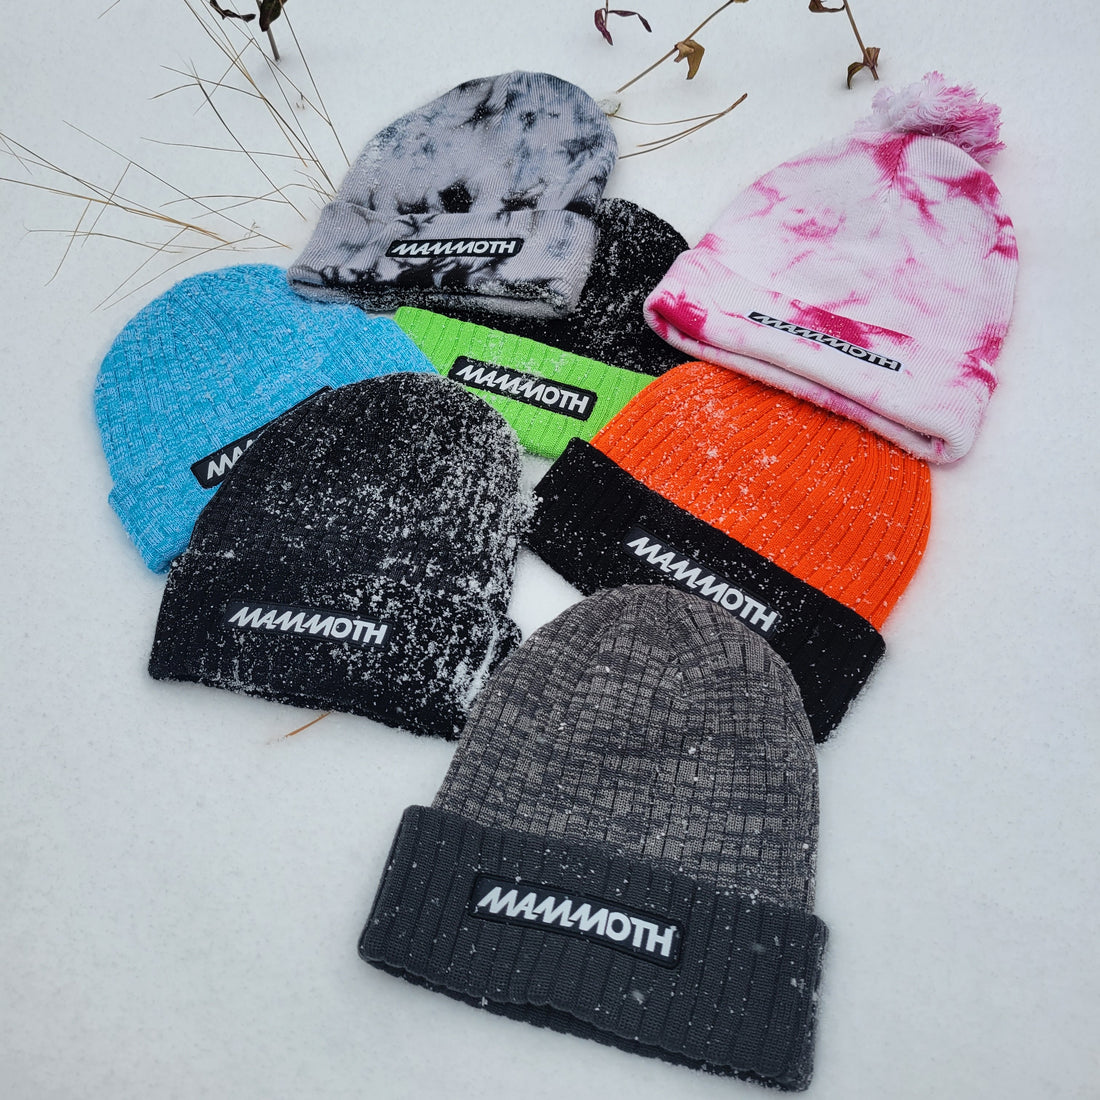 Caps, hats, and beanies - over 20,000 in stock